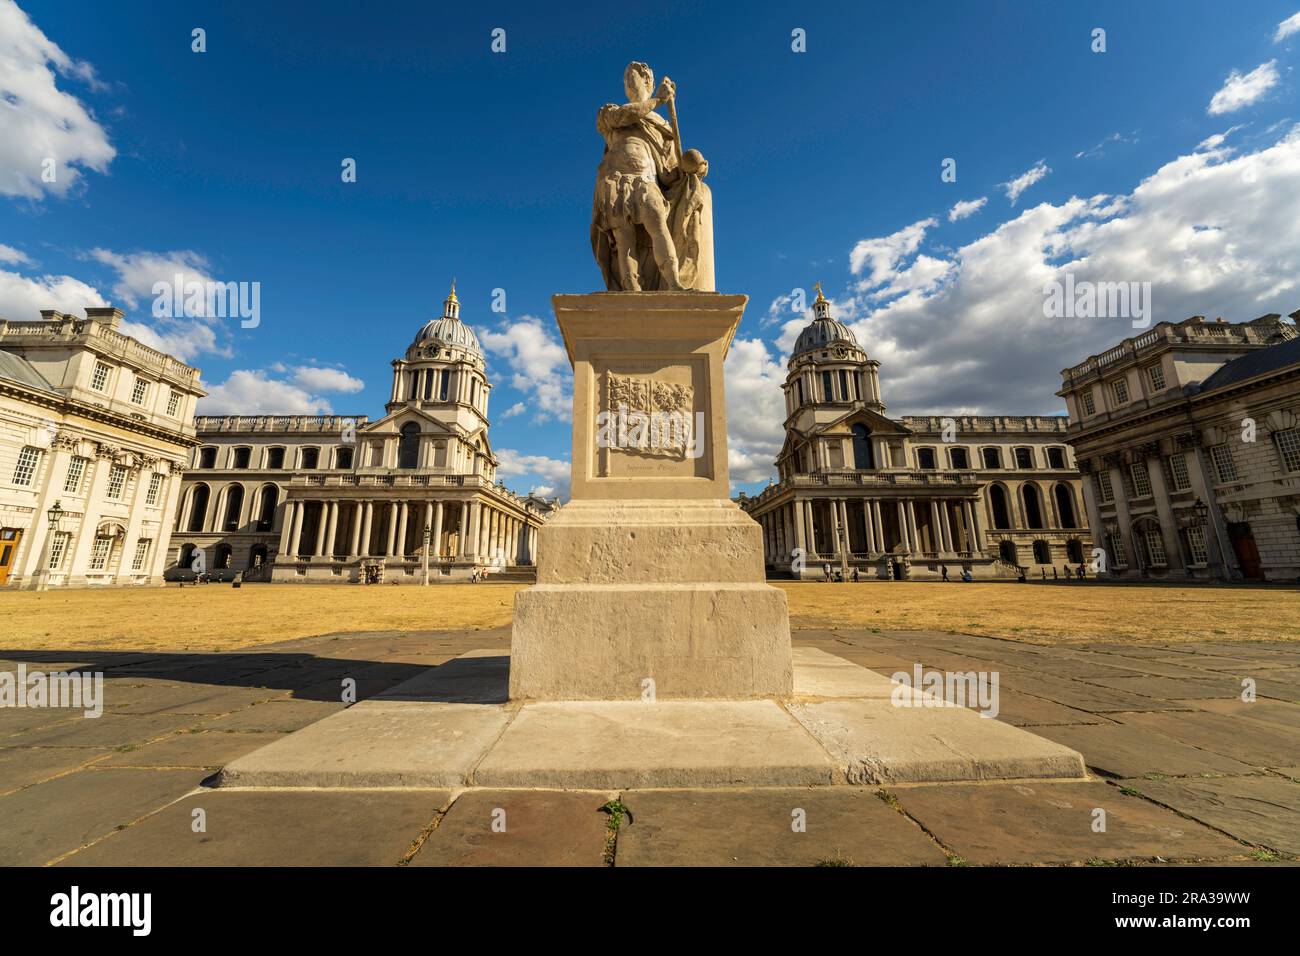 Grand Square mit King George II. Statue in Greenwich. Heimat des Royal Observatory, Old Royal Naval College, Queen's House Kunstgalerie und mehr. Stockfoto